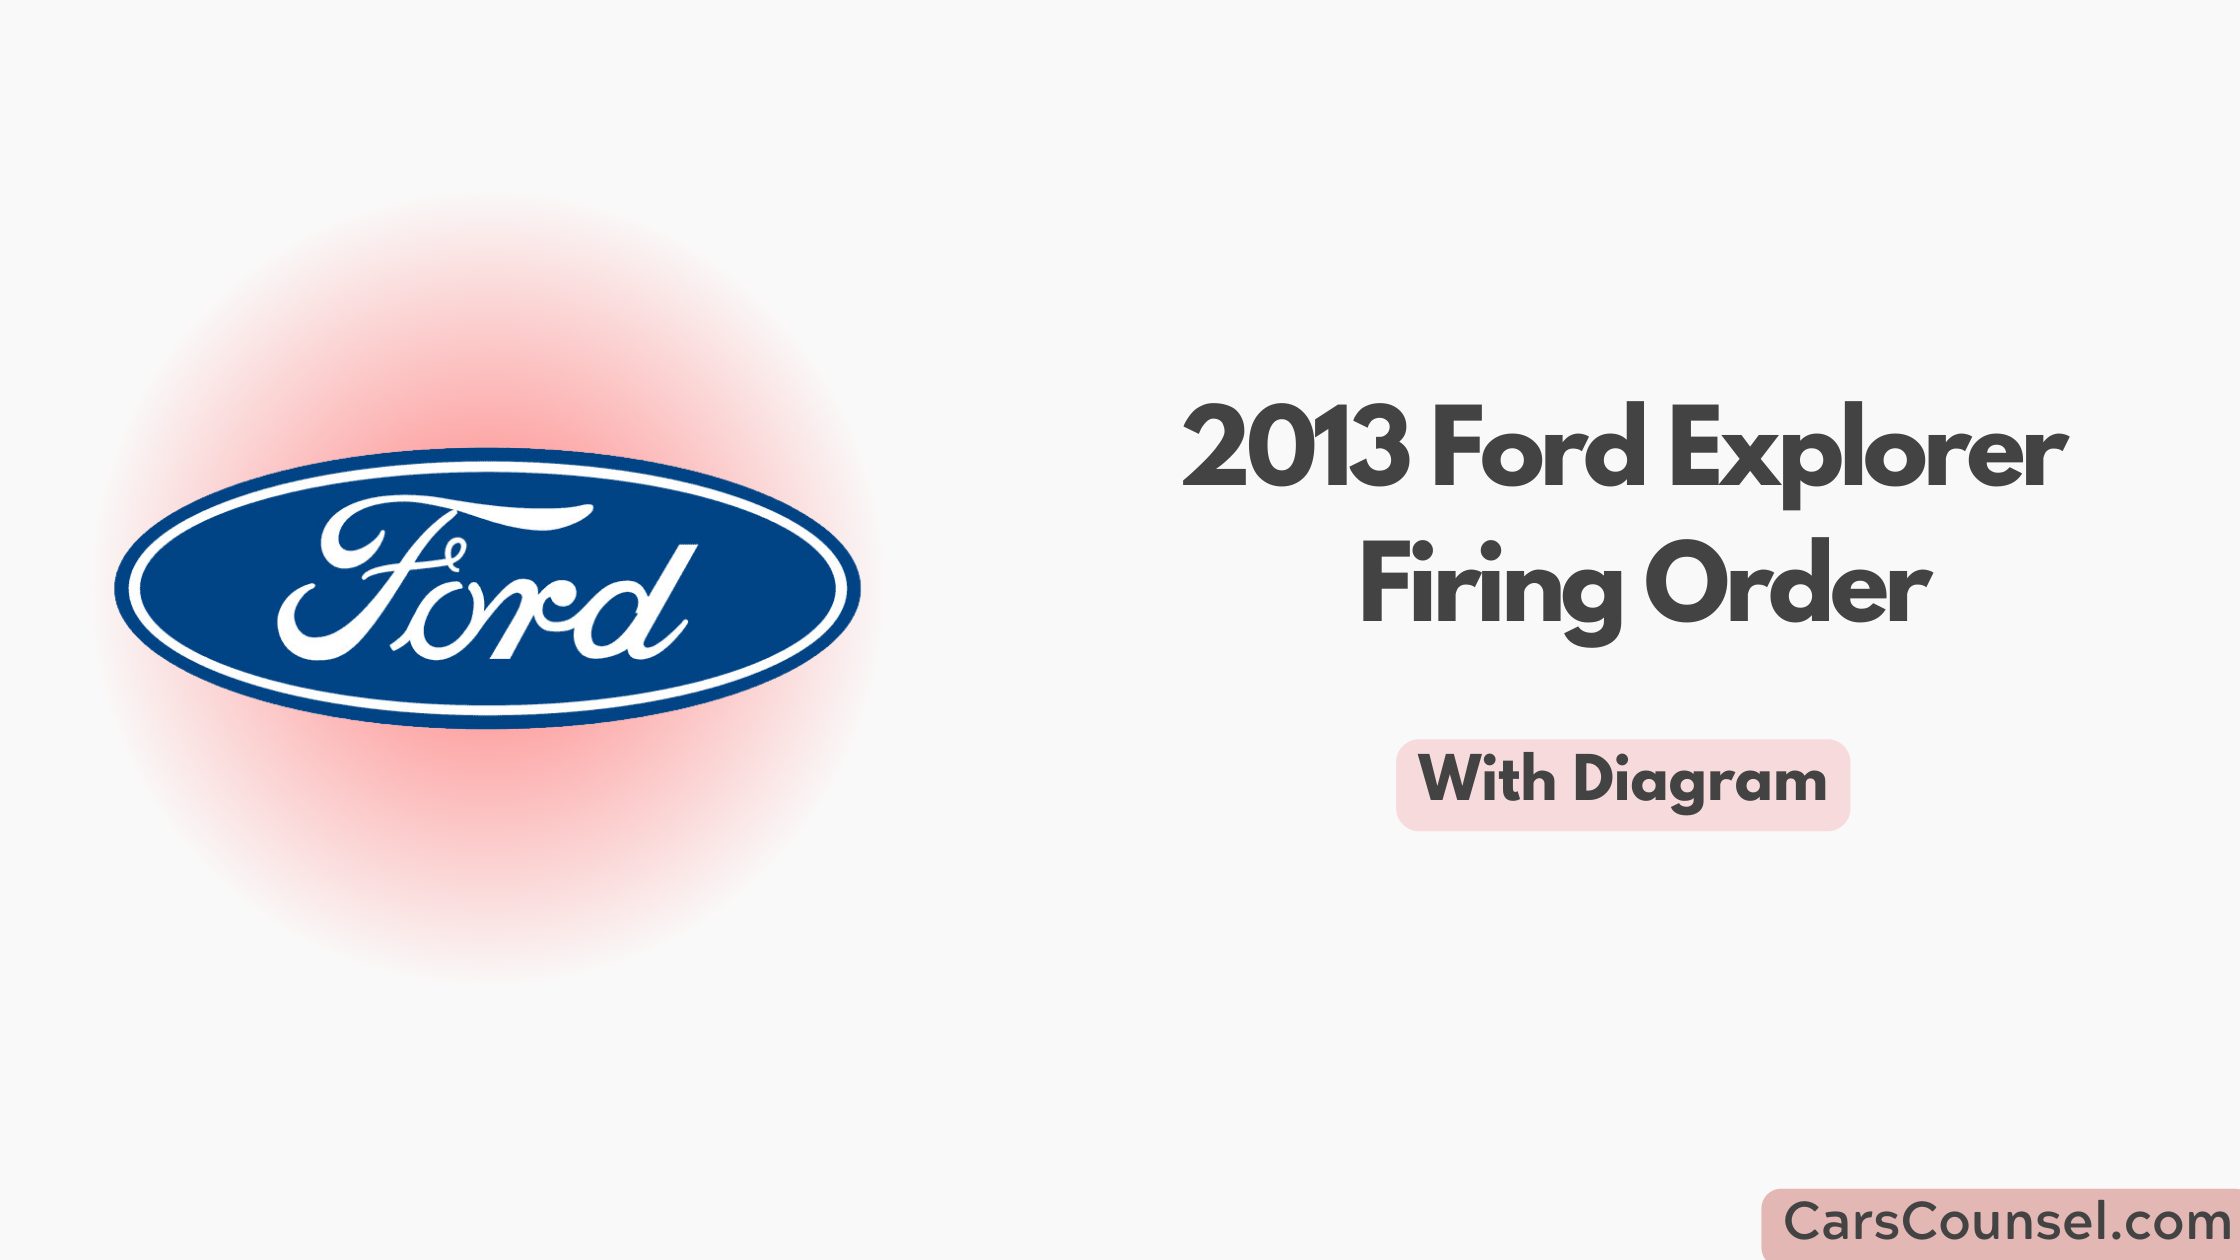 2013 Ford Explorer Firing Order With Diagram